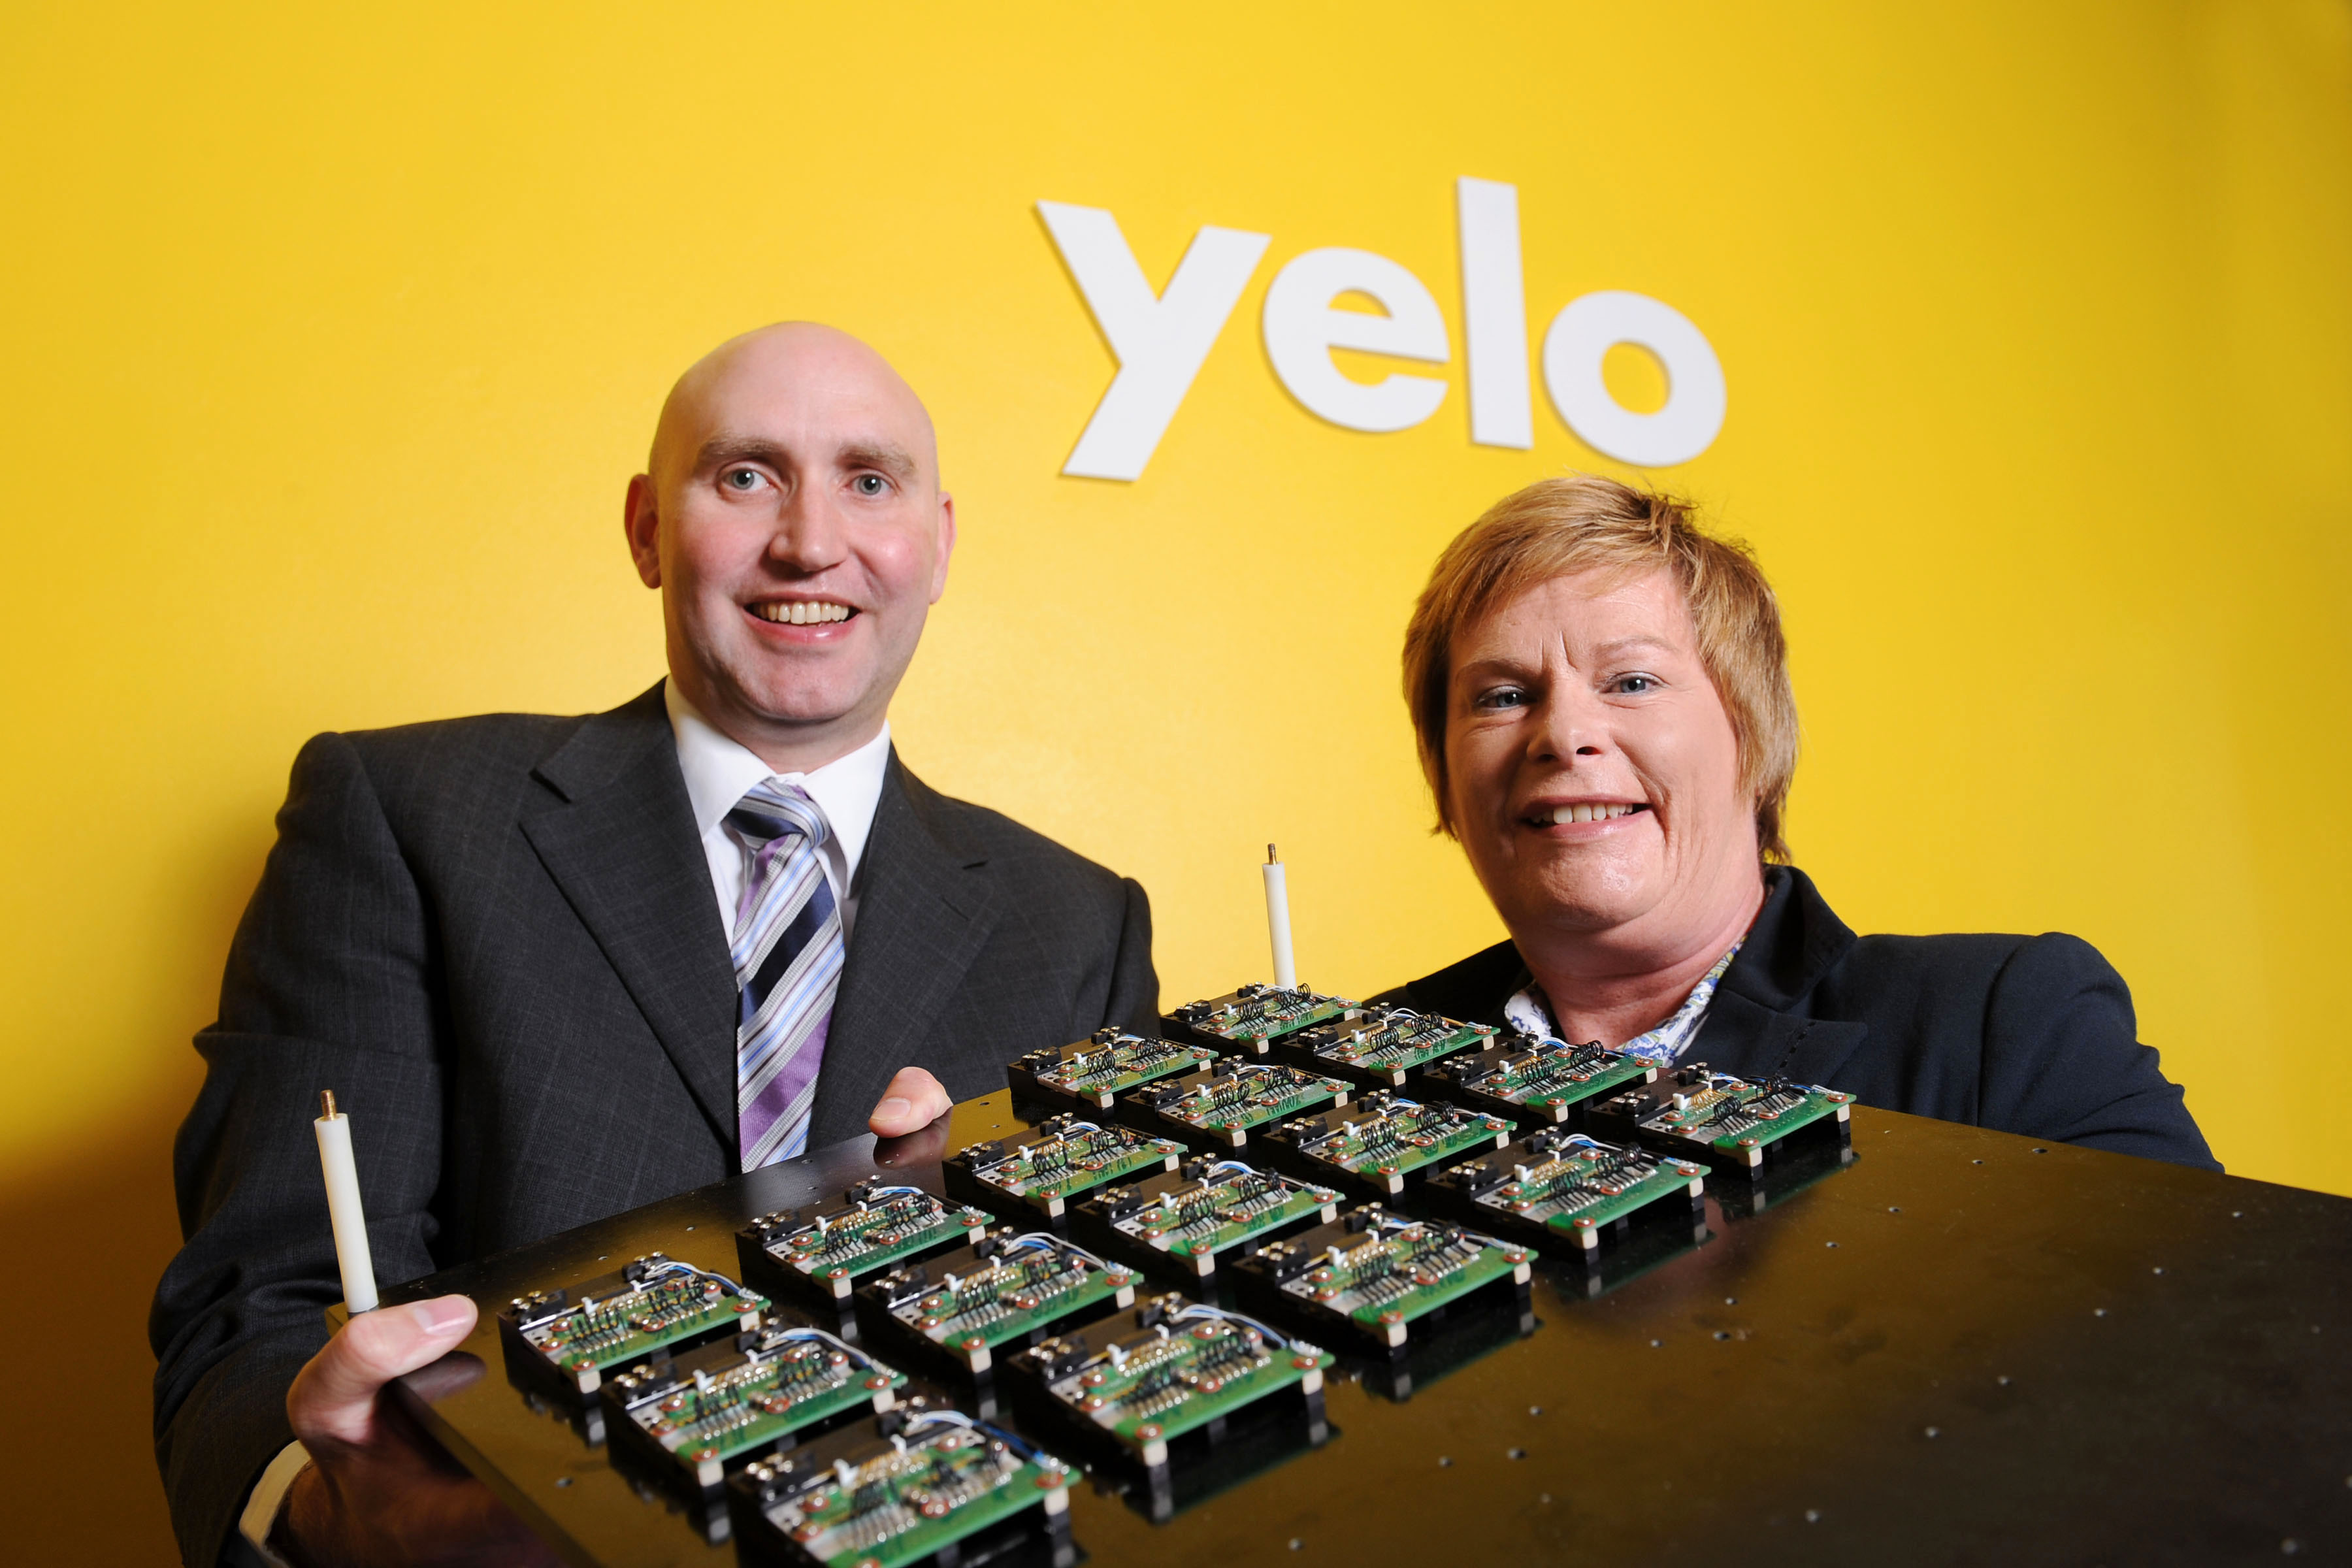 Yelo's technology helps keep YouTube and Facebook in business